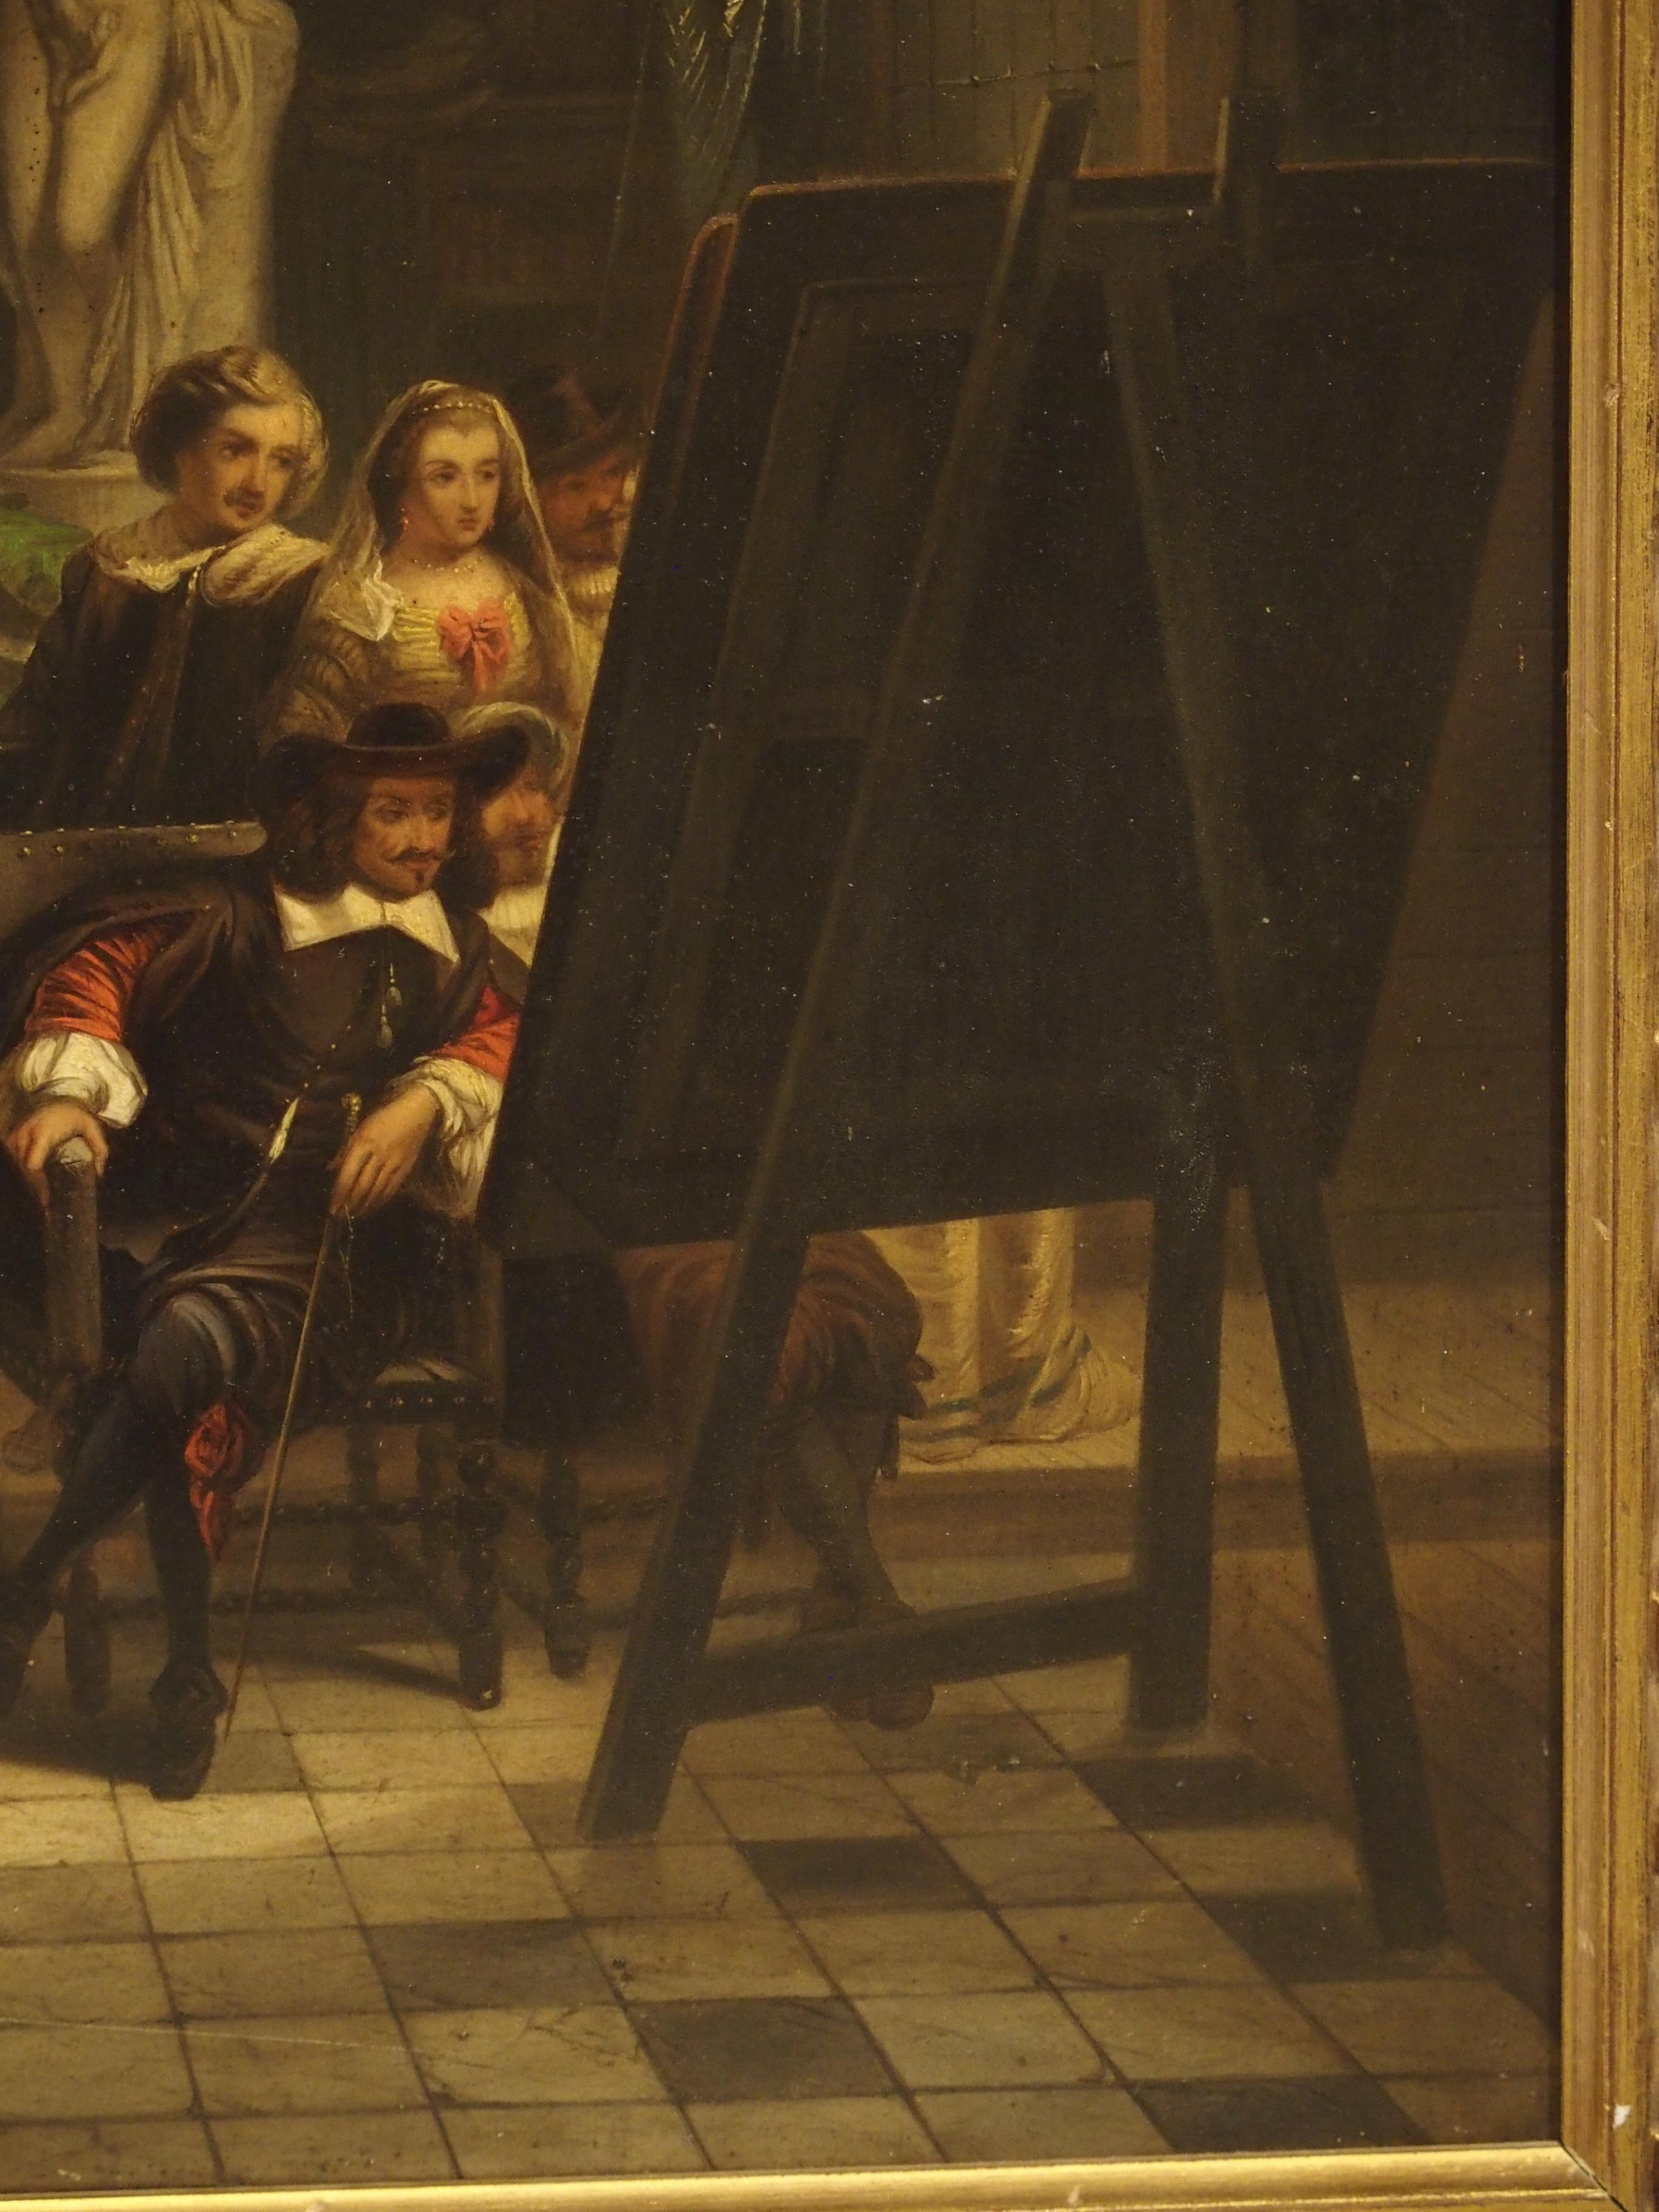 Hand-Painted Antique Oil on Board Painting, “The Mayor of Amsterdam in Rembrandt’s Studio”